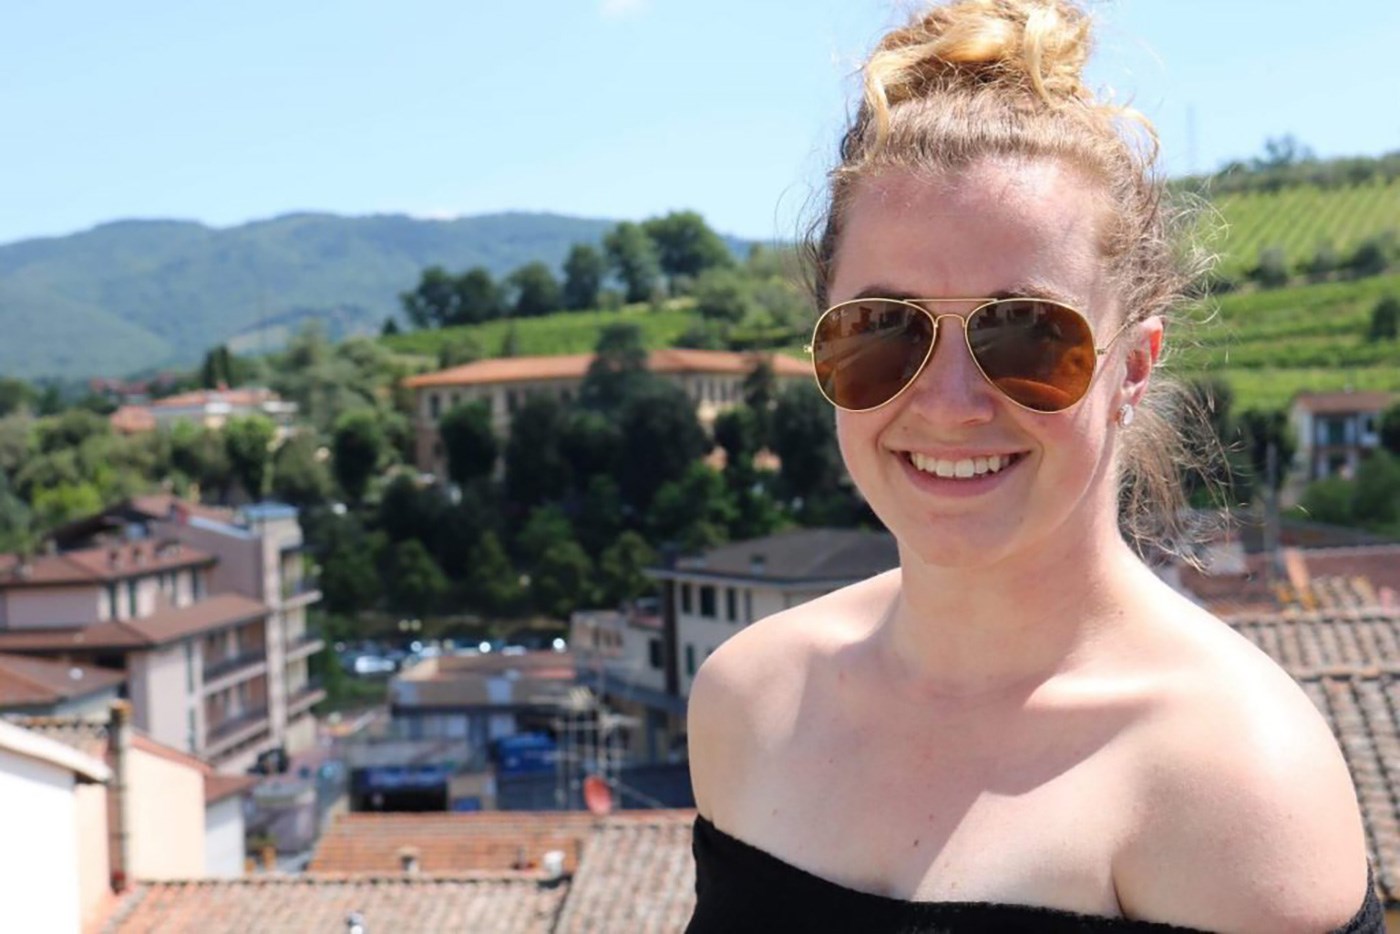 UMass Lowell student, Sarah George poses with a beautiful backdrop of the Tuscany, Italy countryside behind here while on a Study Abroad trip to Florence in the Summer of 2018.